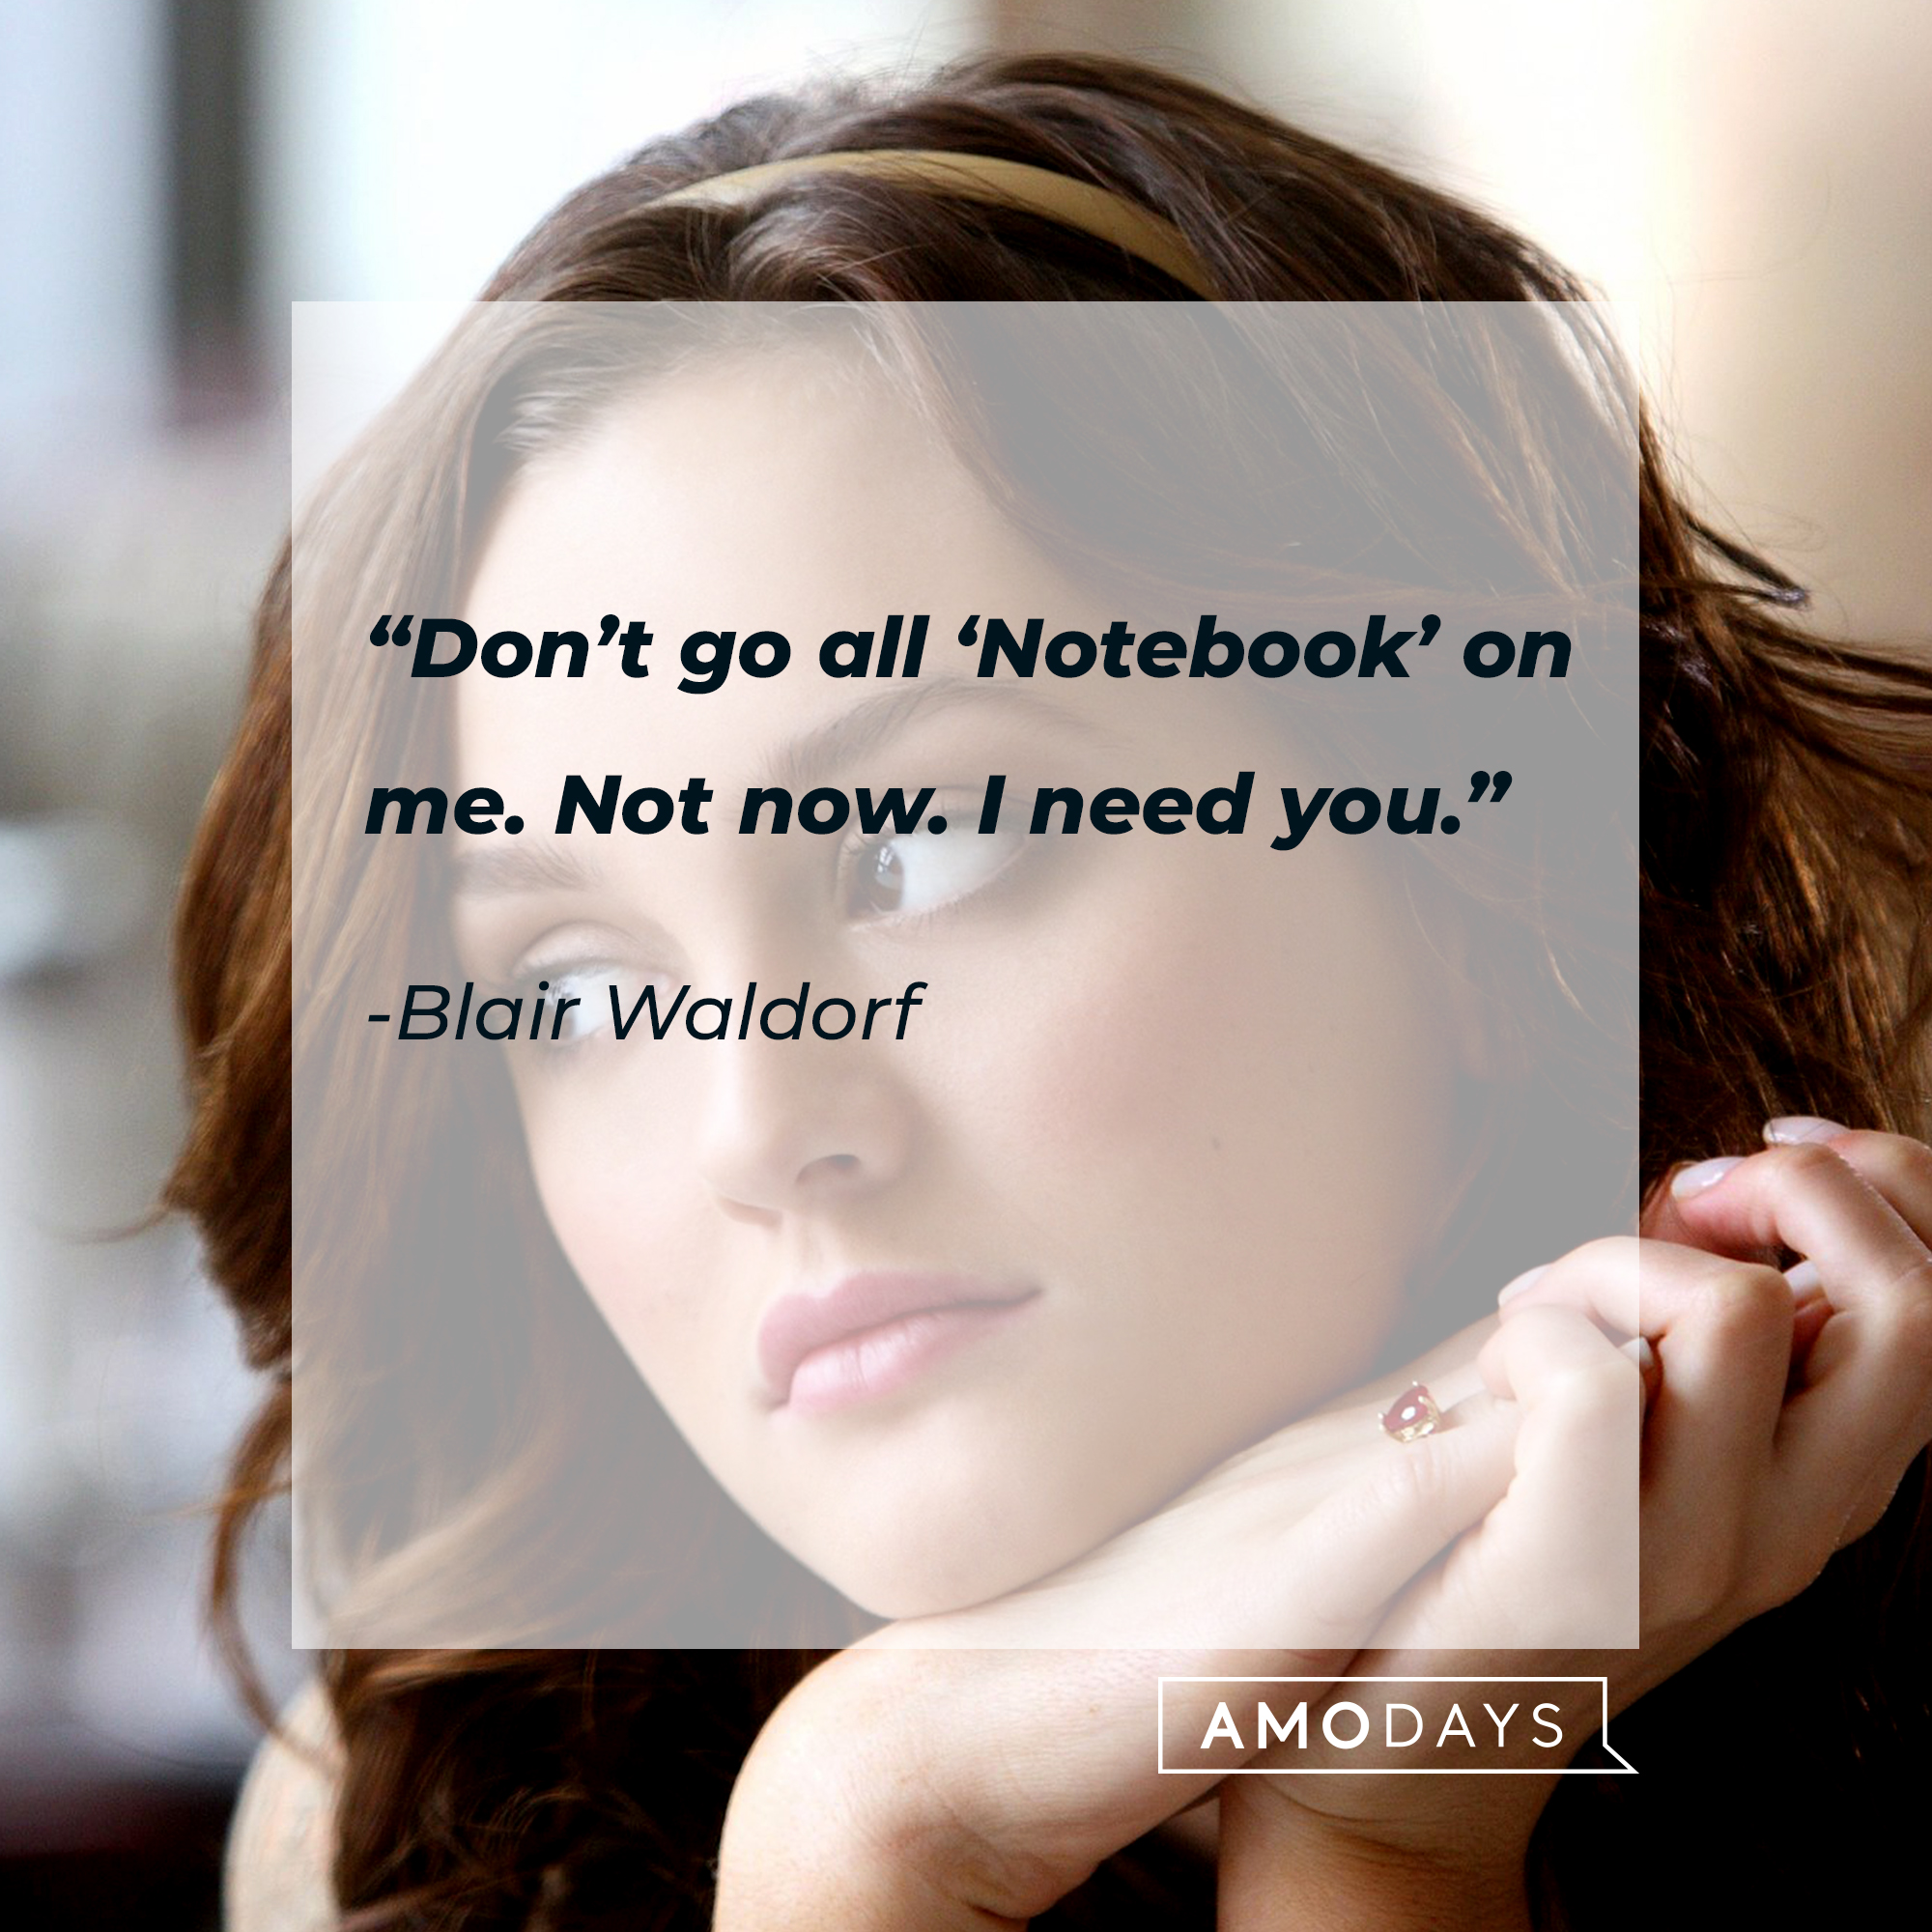 Blair Waldorf from "Gossip Girl" with her quote: “Don’t go all ‘Notebook’ on me. Not now. I need you.” | Source: Facebook.com/GossipGirl